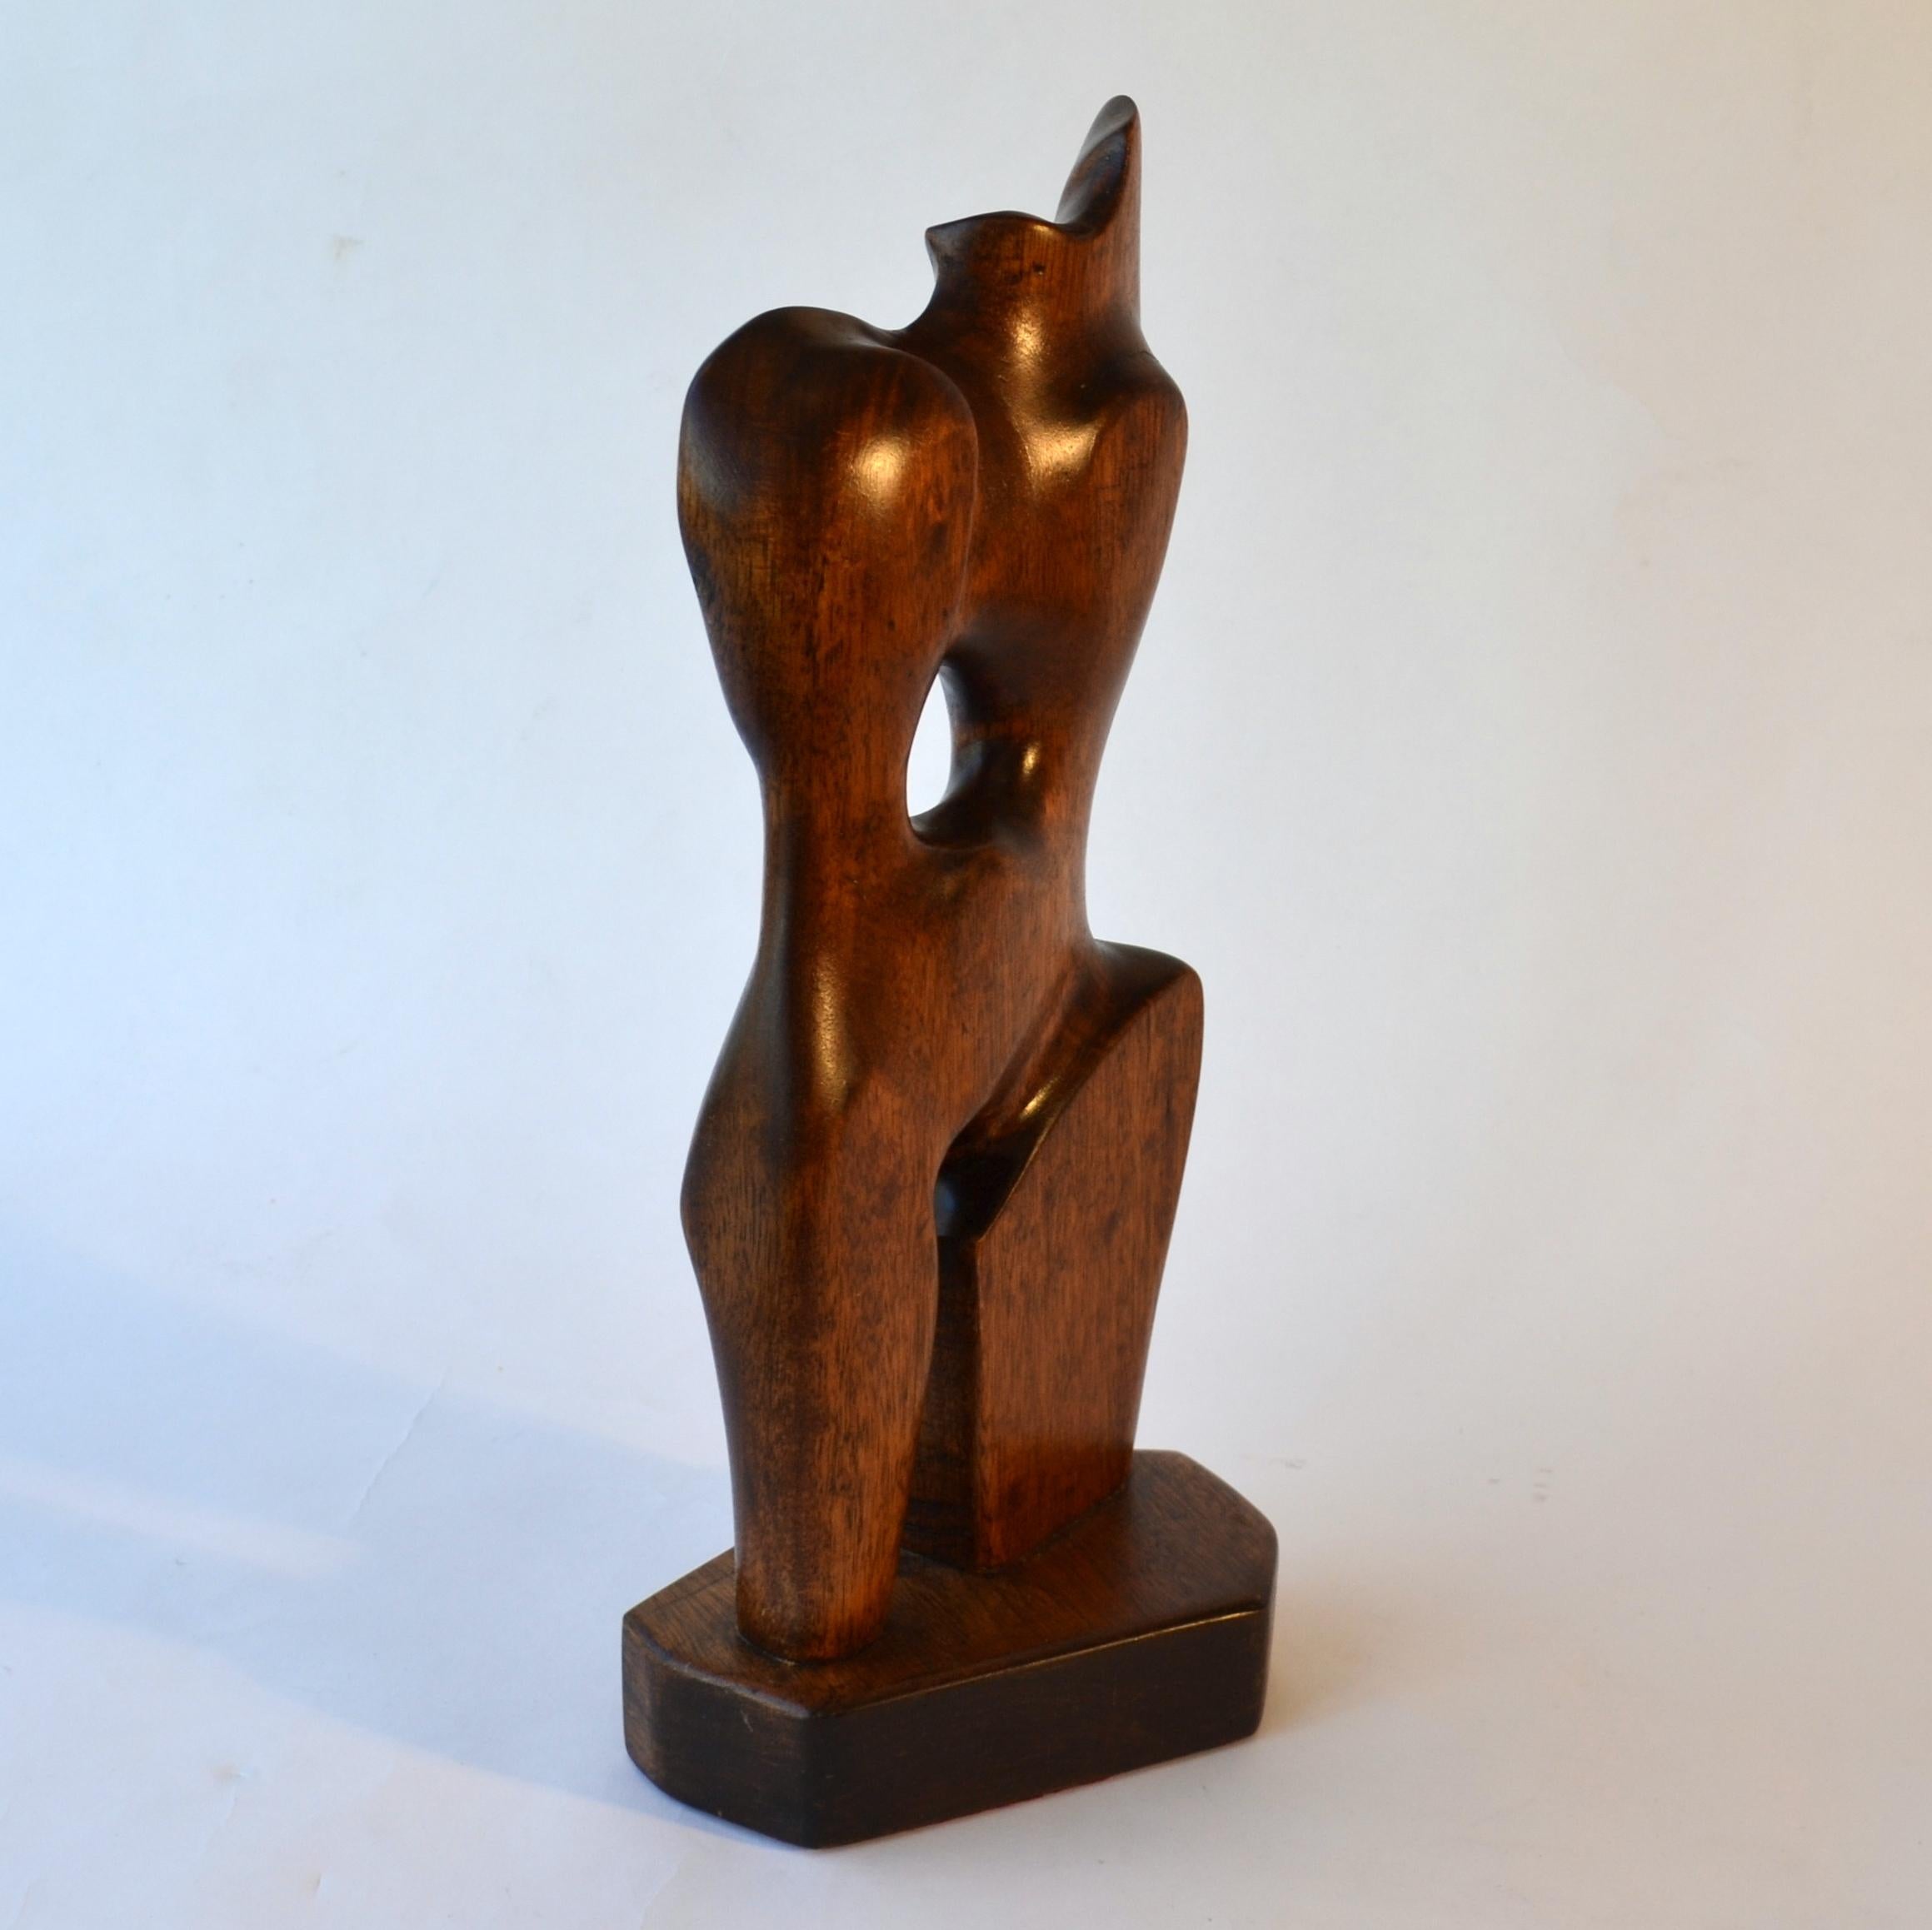 Hand-Carved Biomorphic Female Torso Sculpture Hand Carved in Mahogany